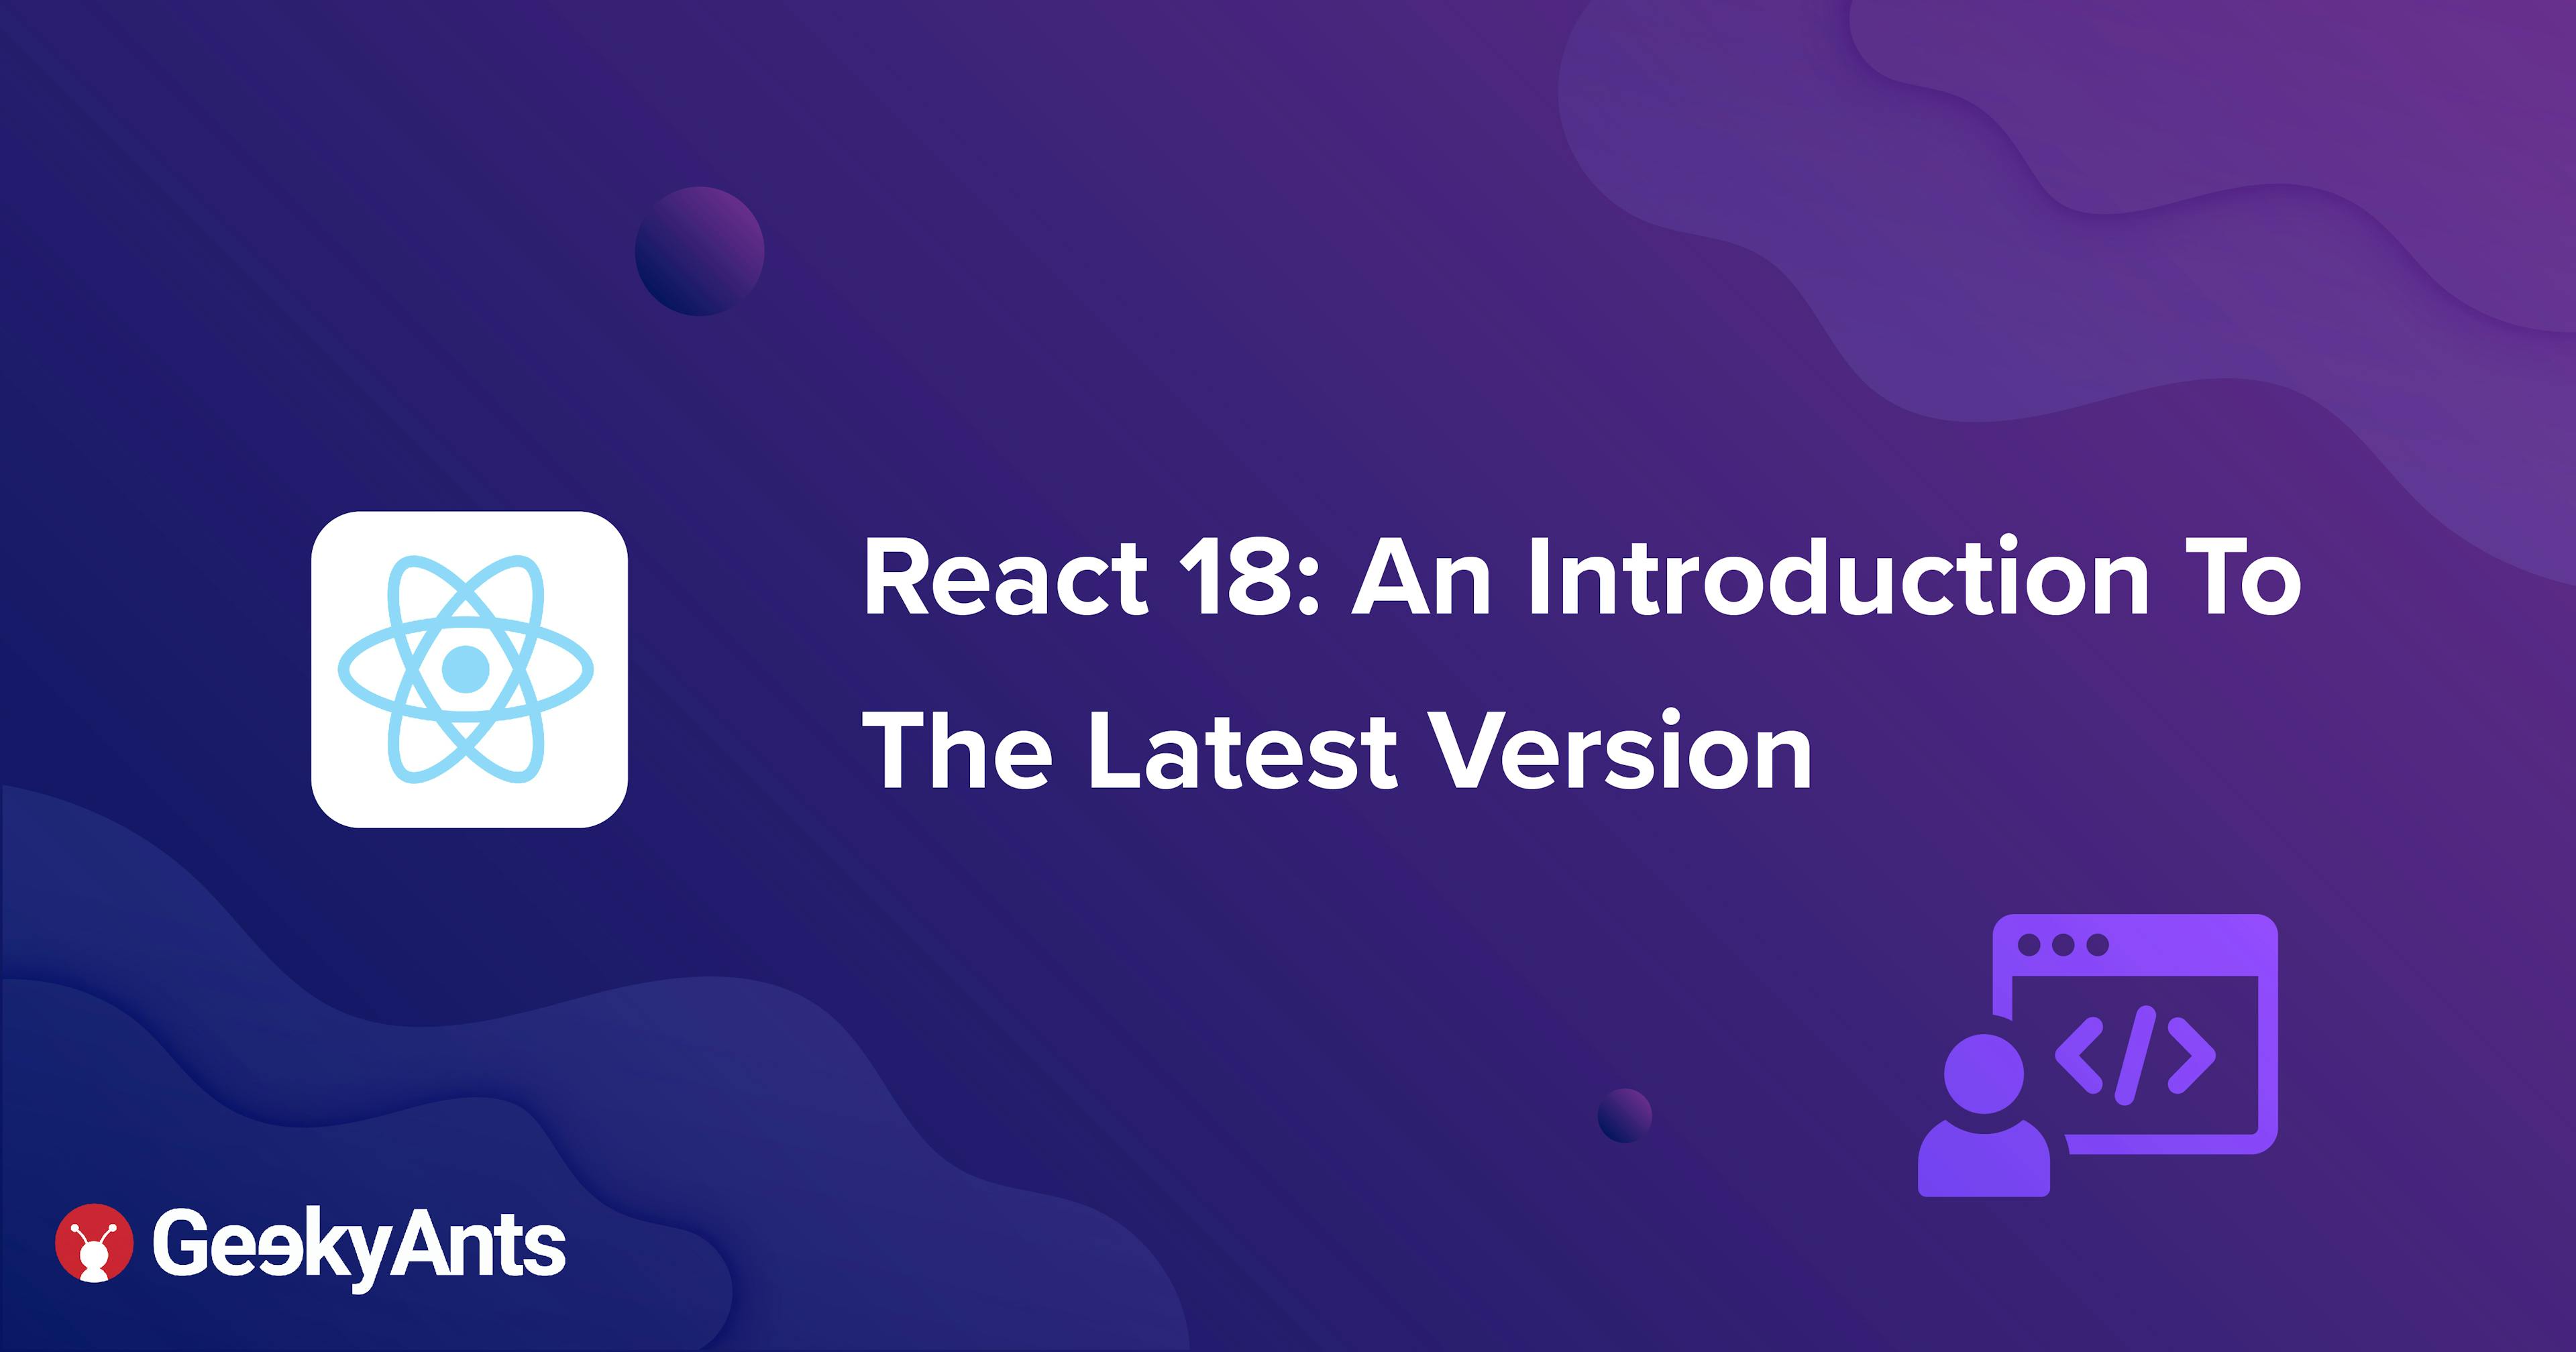 React 18: An Introduction To The Latest Version